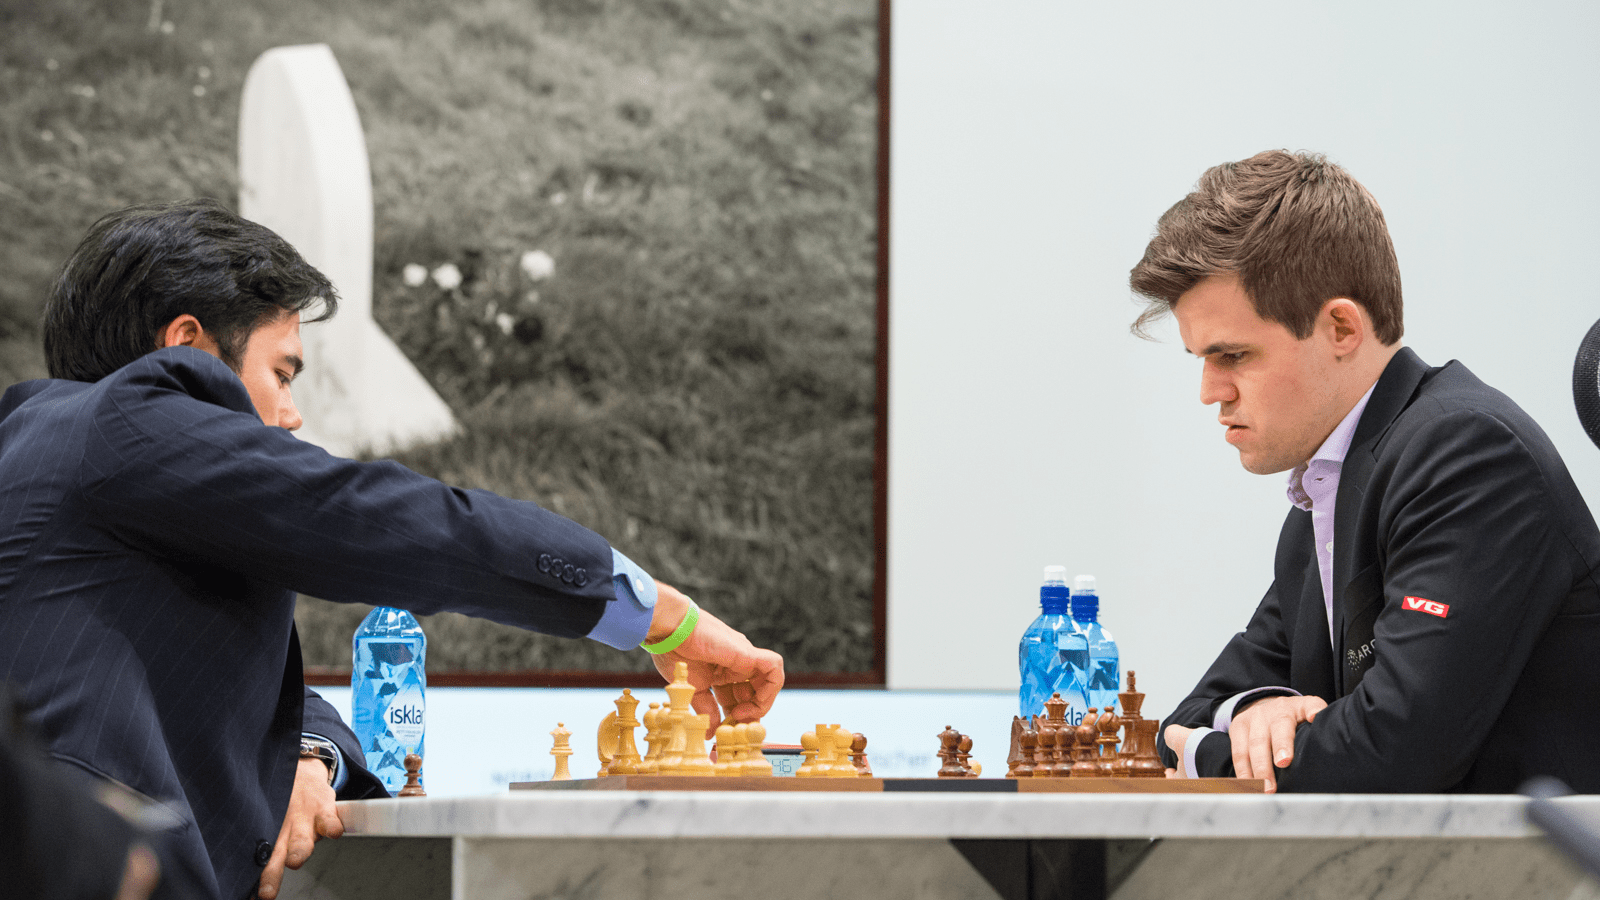 Chess GM Magnus Carlsen arrives late to Hikaru match in most